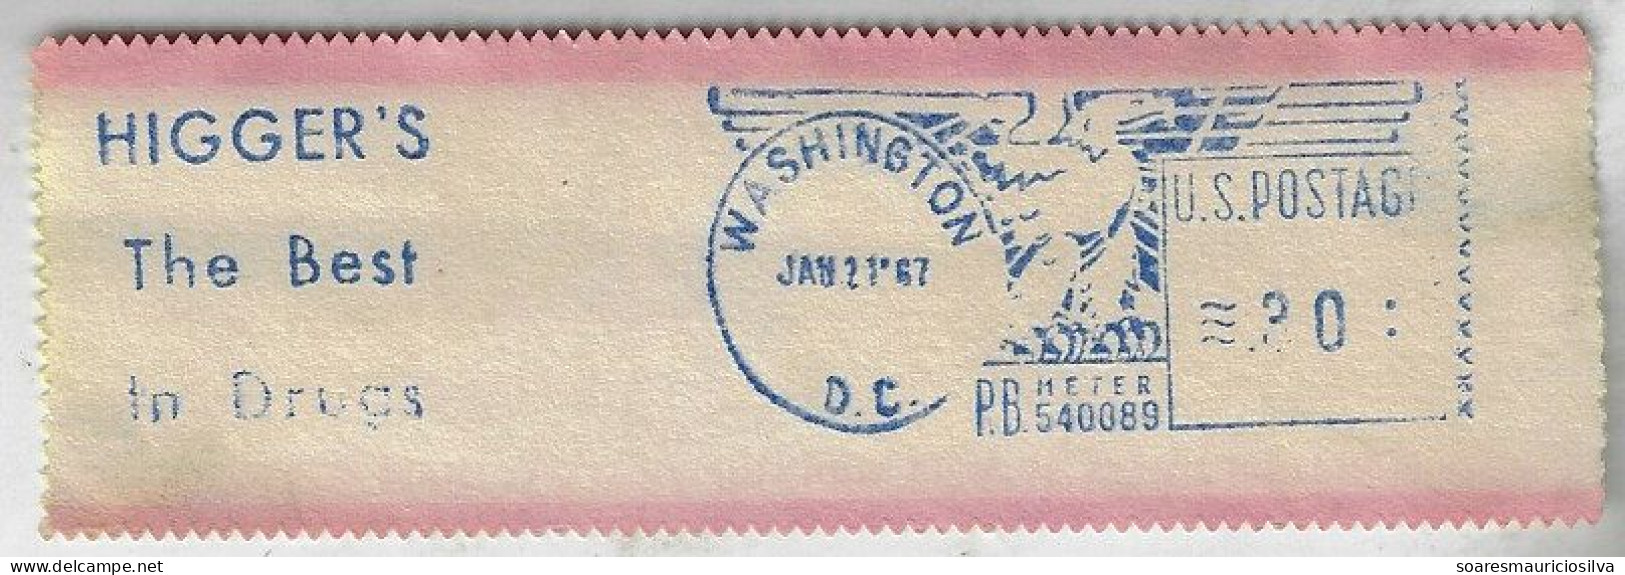 USA 1967 Label With Meter Stamp Pitney Bowes Slogan Higger's The Best In Drugs From Washington 30 Cents - Drugs